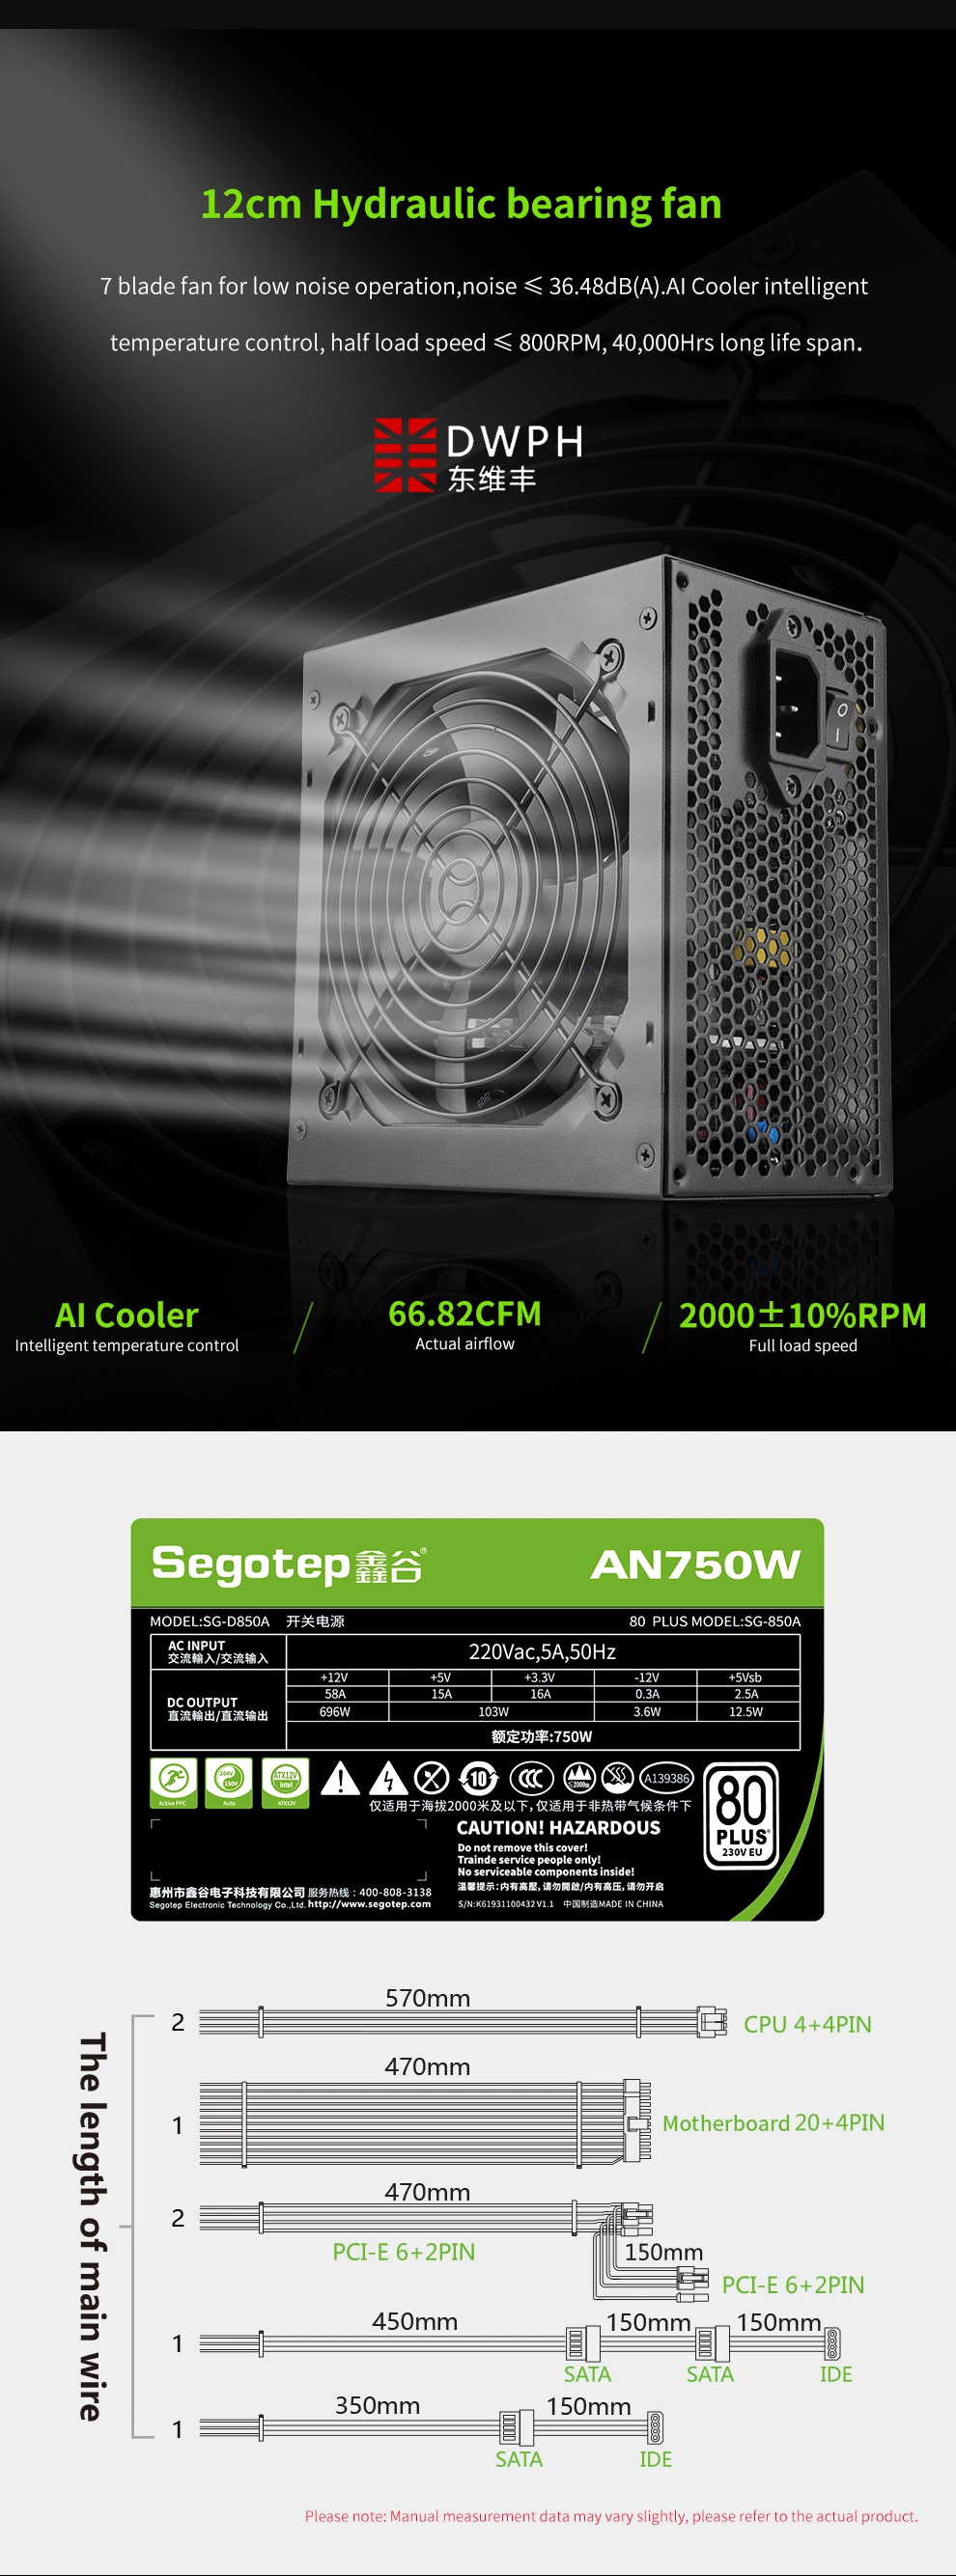 Factory-Wholesale-Fast-Delivery-Segotep An750W- 650W-550W-80 Plus 230veu-ATX-Switching-Power-Supply